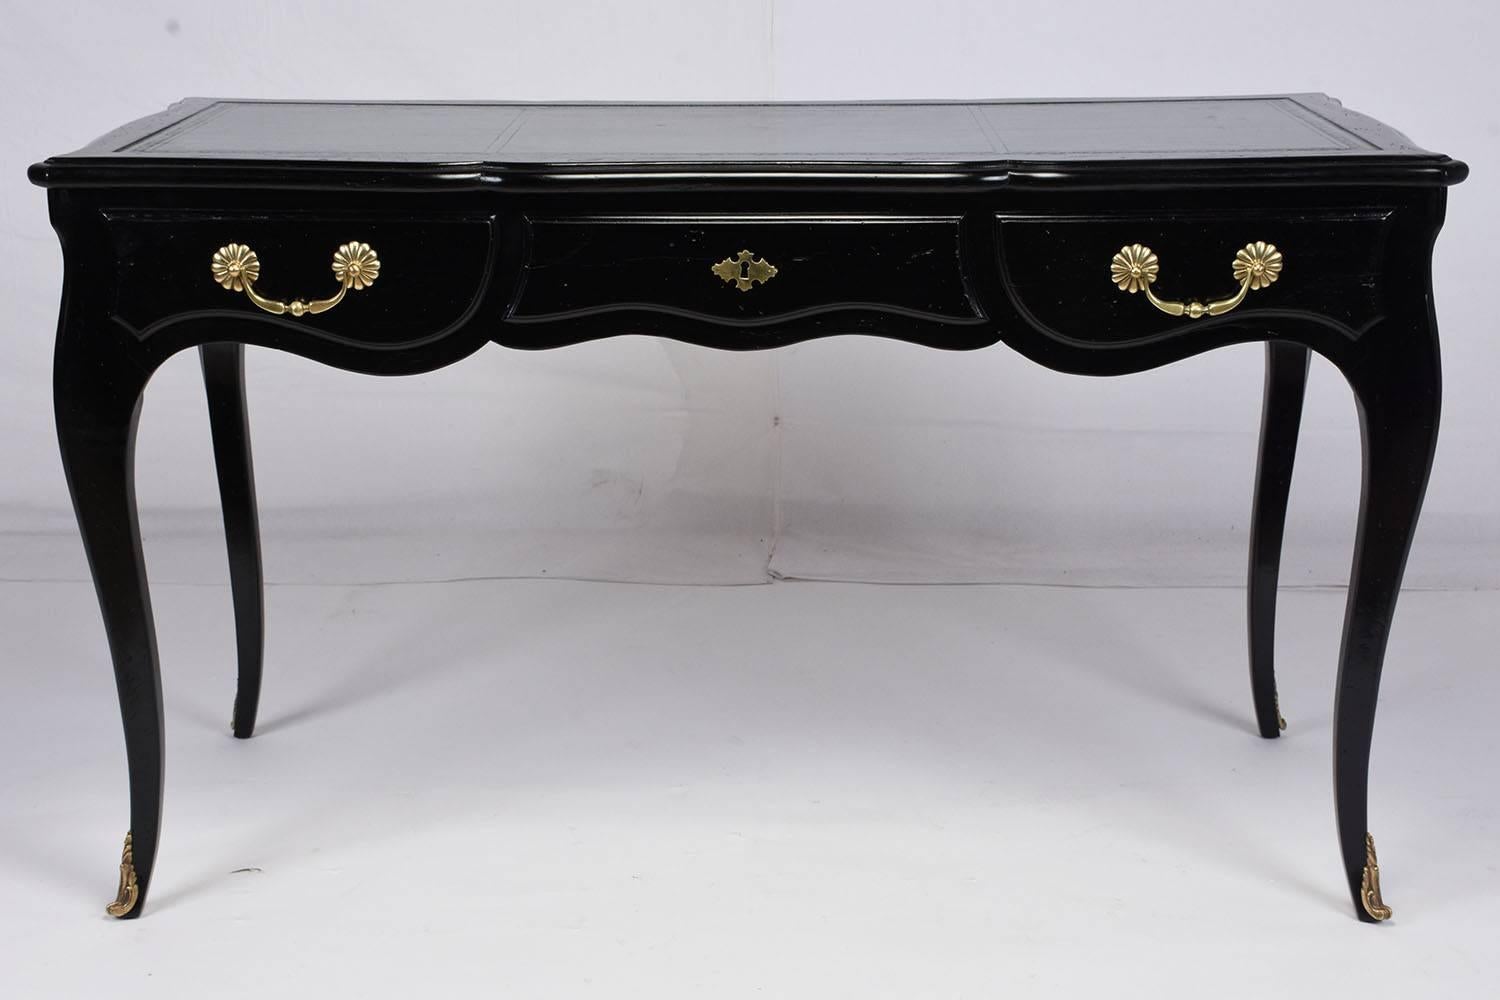 This 1970s Louis XV-style desk is made by Auffray & Co. and features carved wood in a beautiful ebonized finish. The carved facade features a scalloped bottom with graceful serpentine legs. The three drawers feature decorative brass drawer pulls and